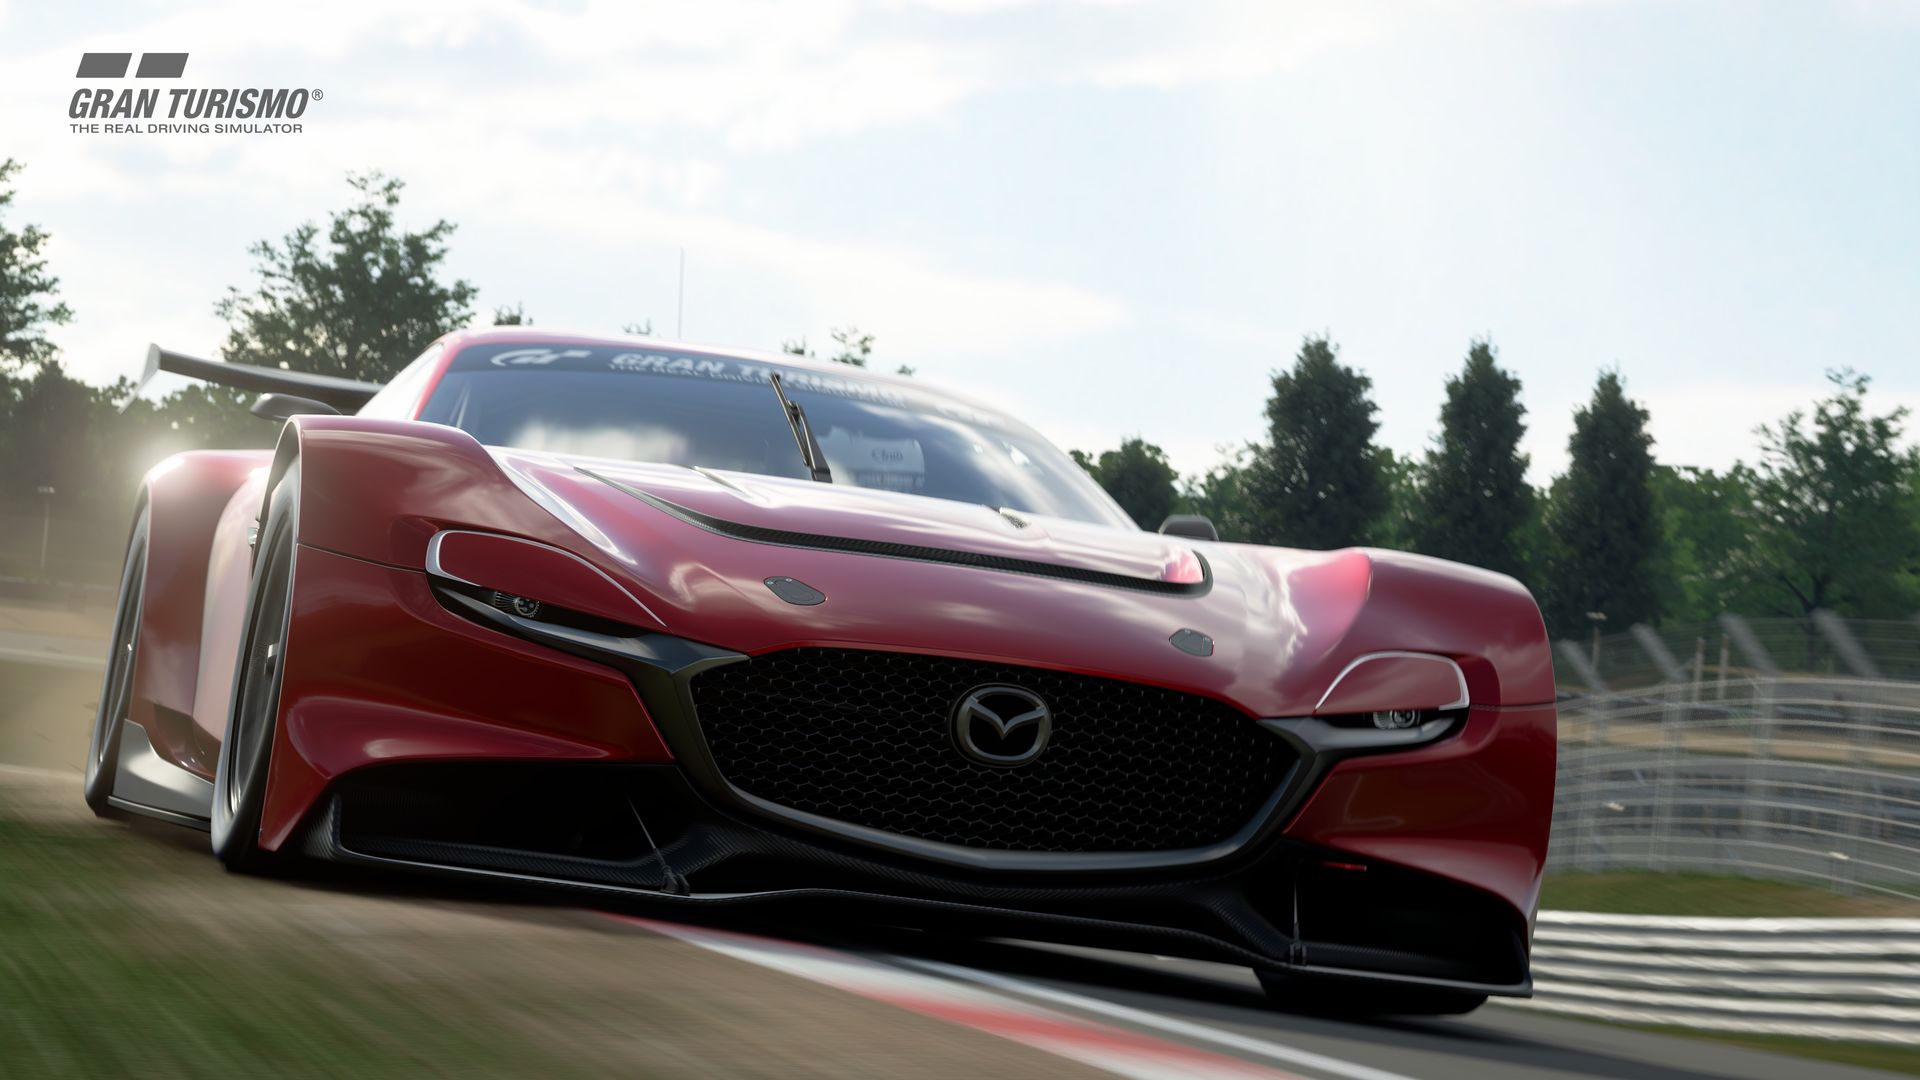 The Gran Turismo Sport May Update Introducing The Mazda Rx Vision Gt3 Concept Gran Turismo Com